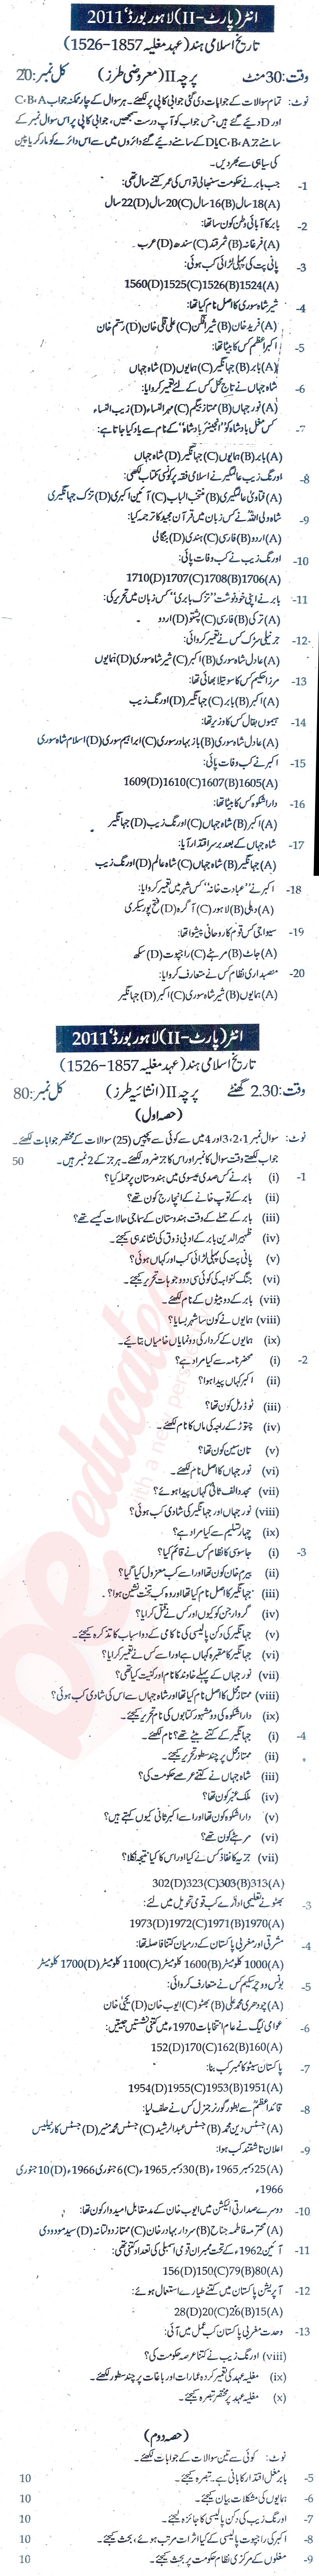 History Of Islamic India FA Part 2 Past Paper Group 1 BISE Lahore 2011